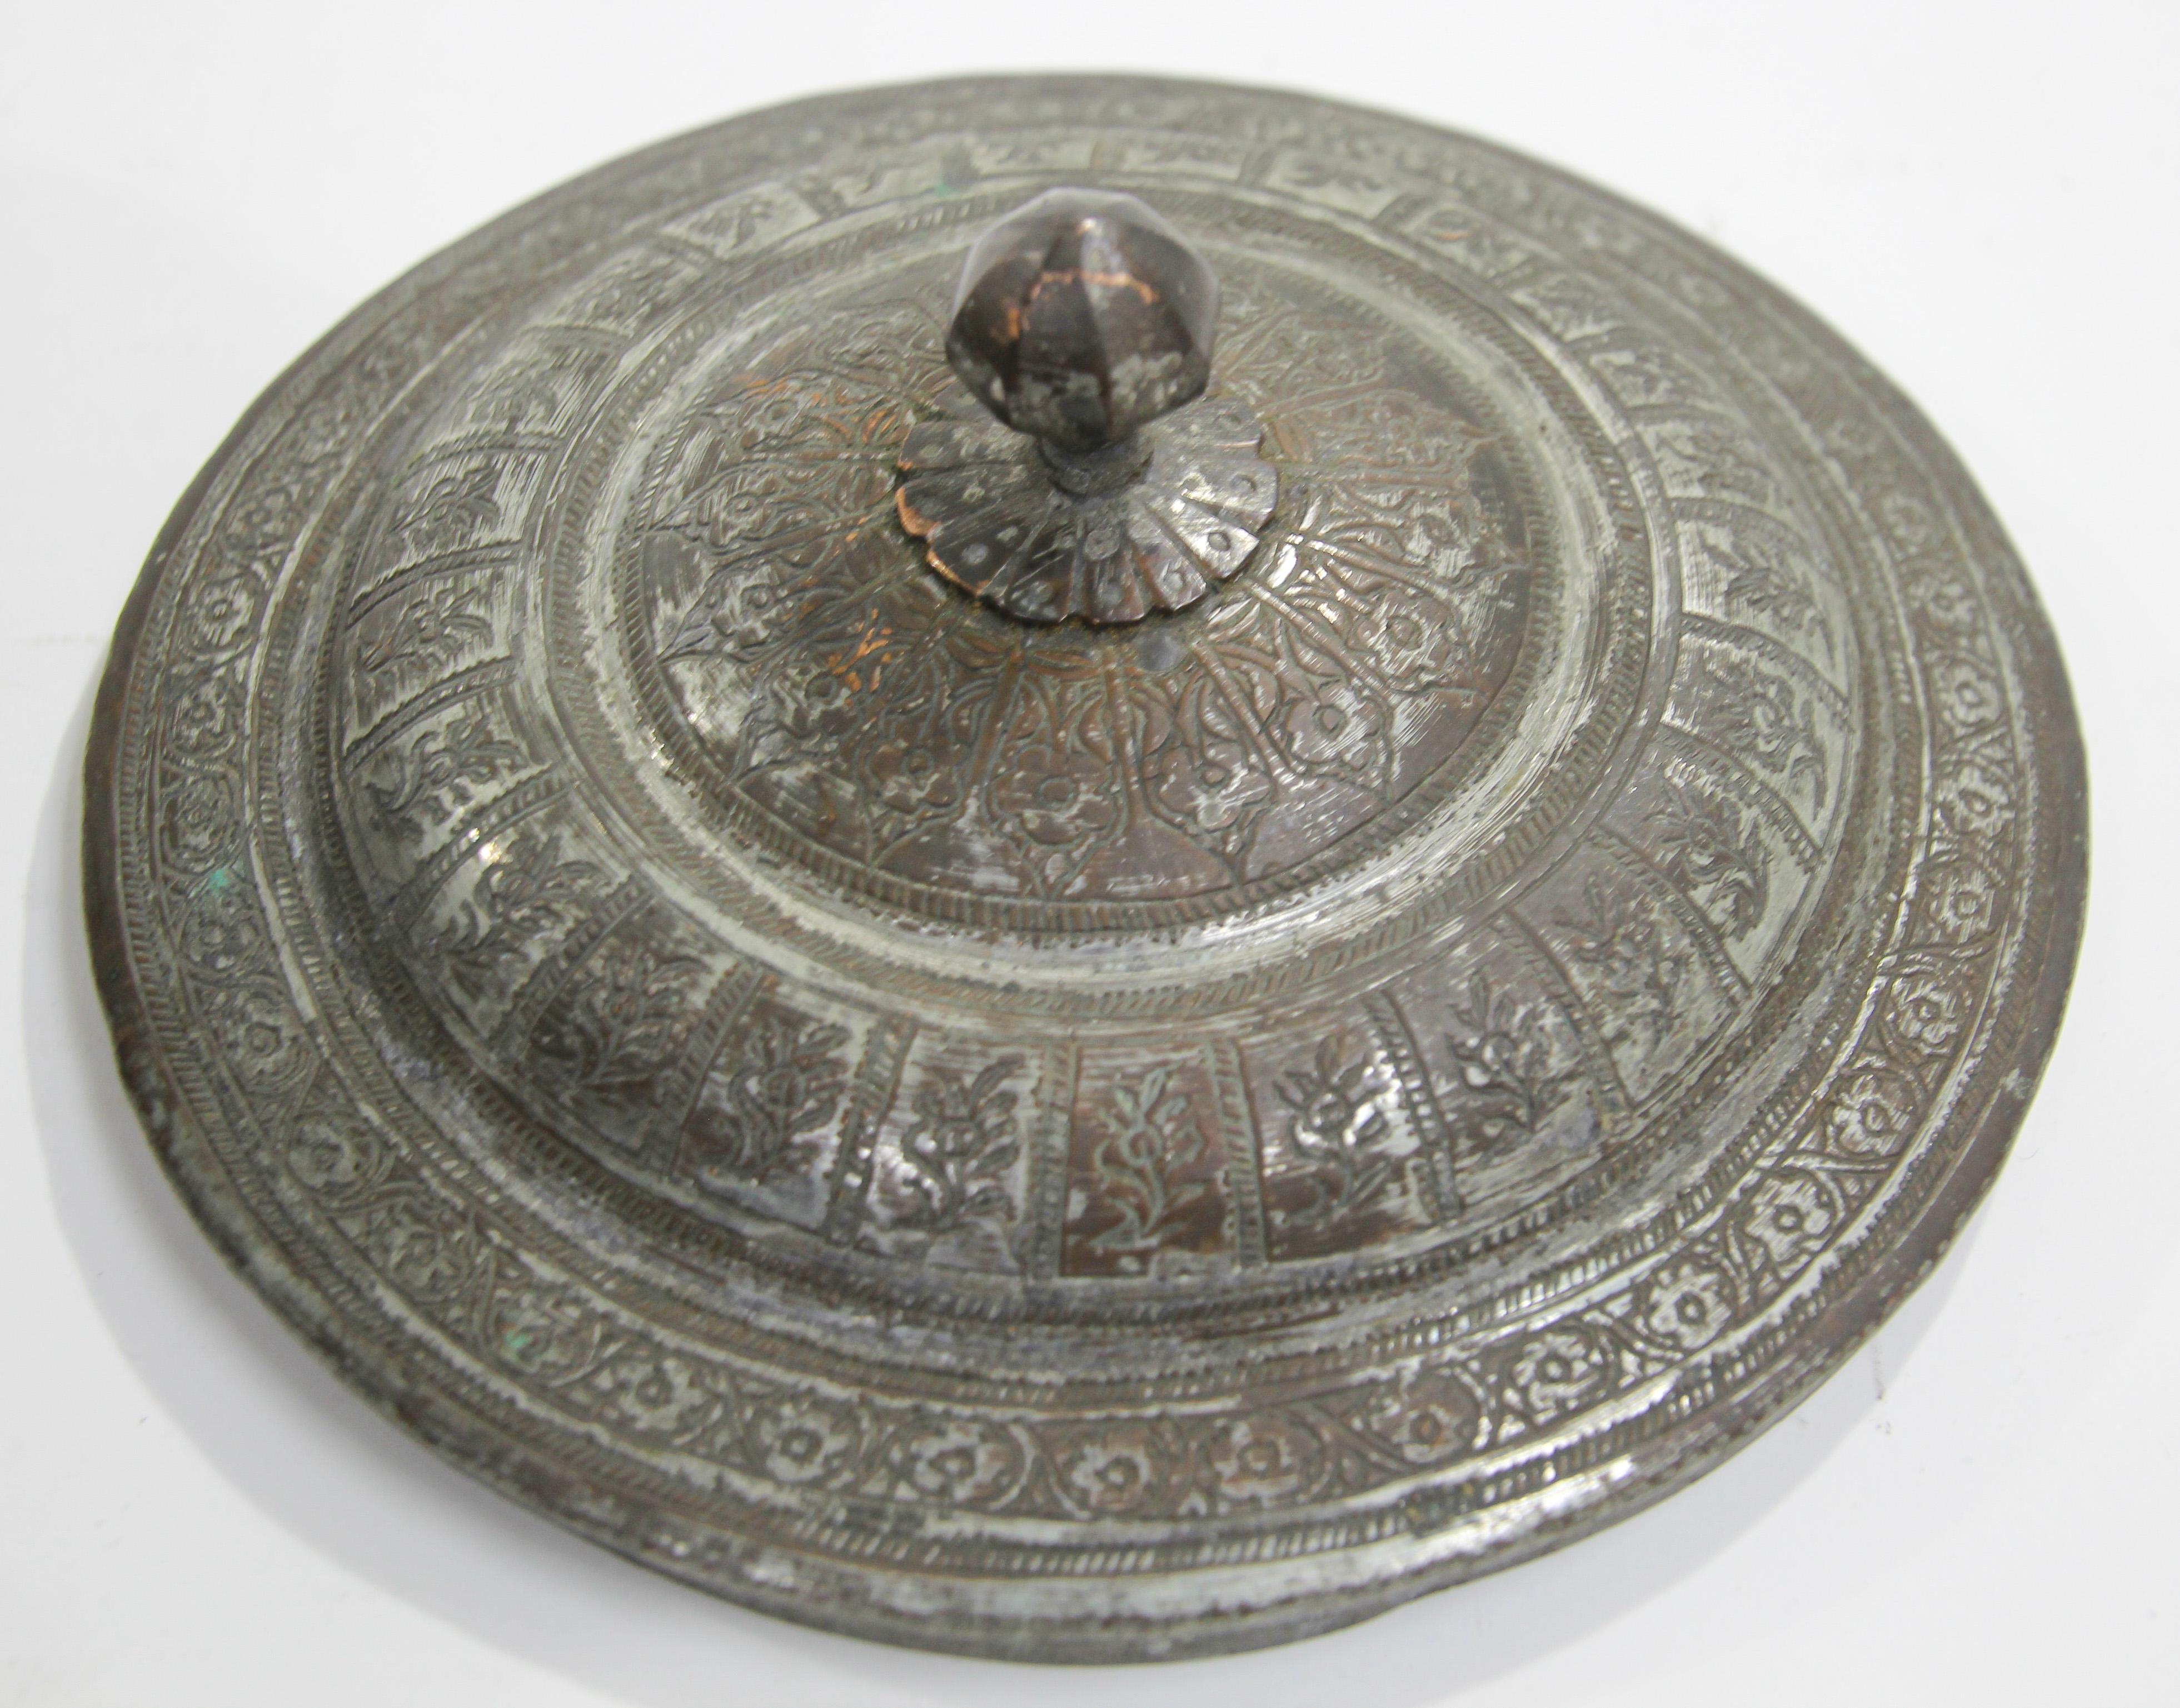 Decorative Tinned Copper South Asian Round Box with Lid In Good Condition For Sale In North Hollywood, CA